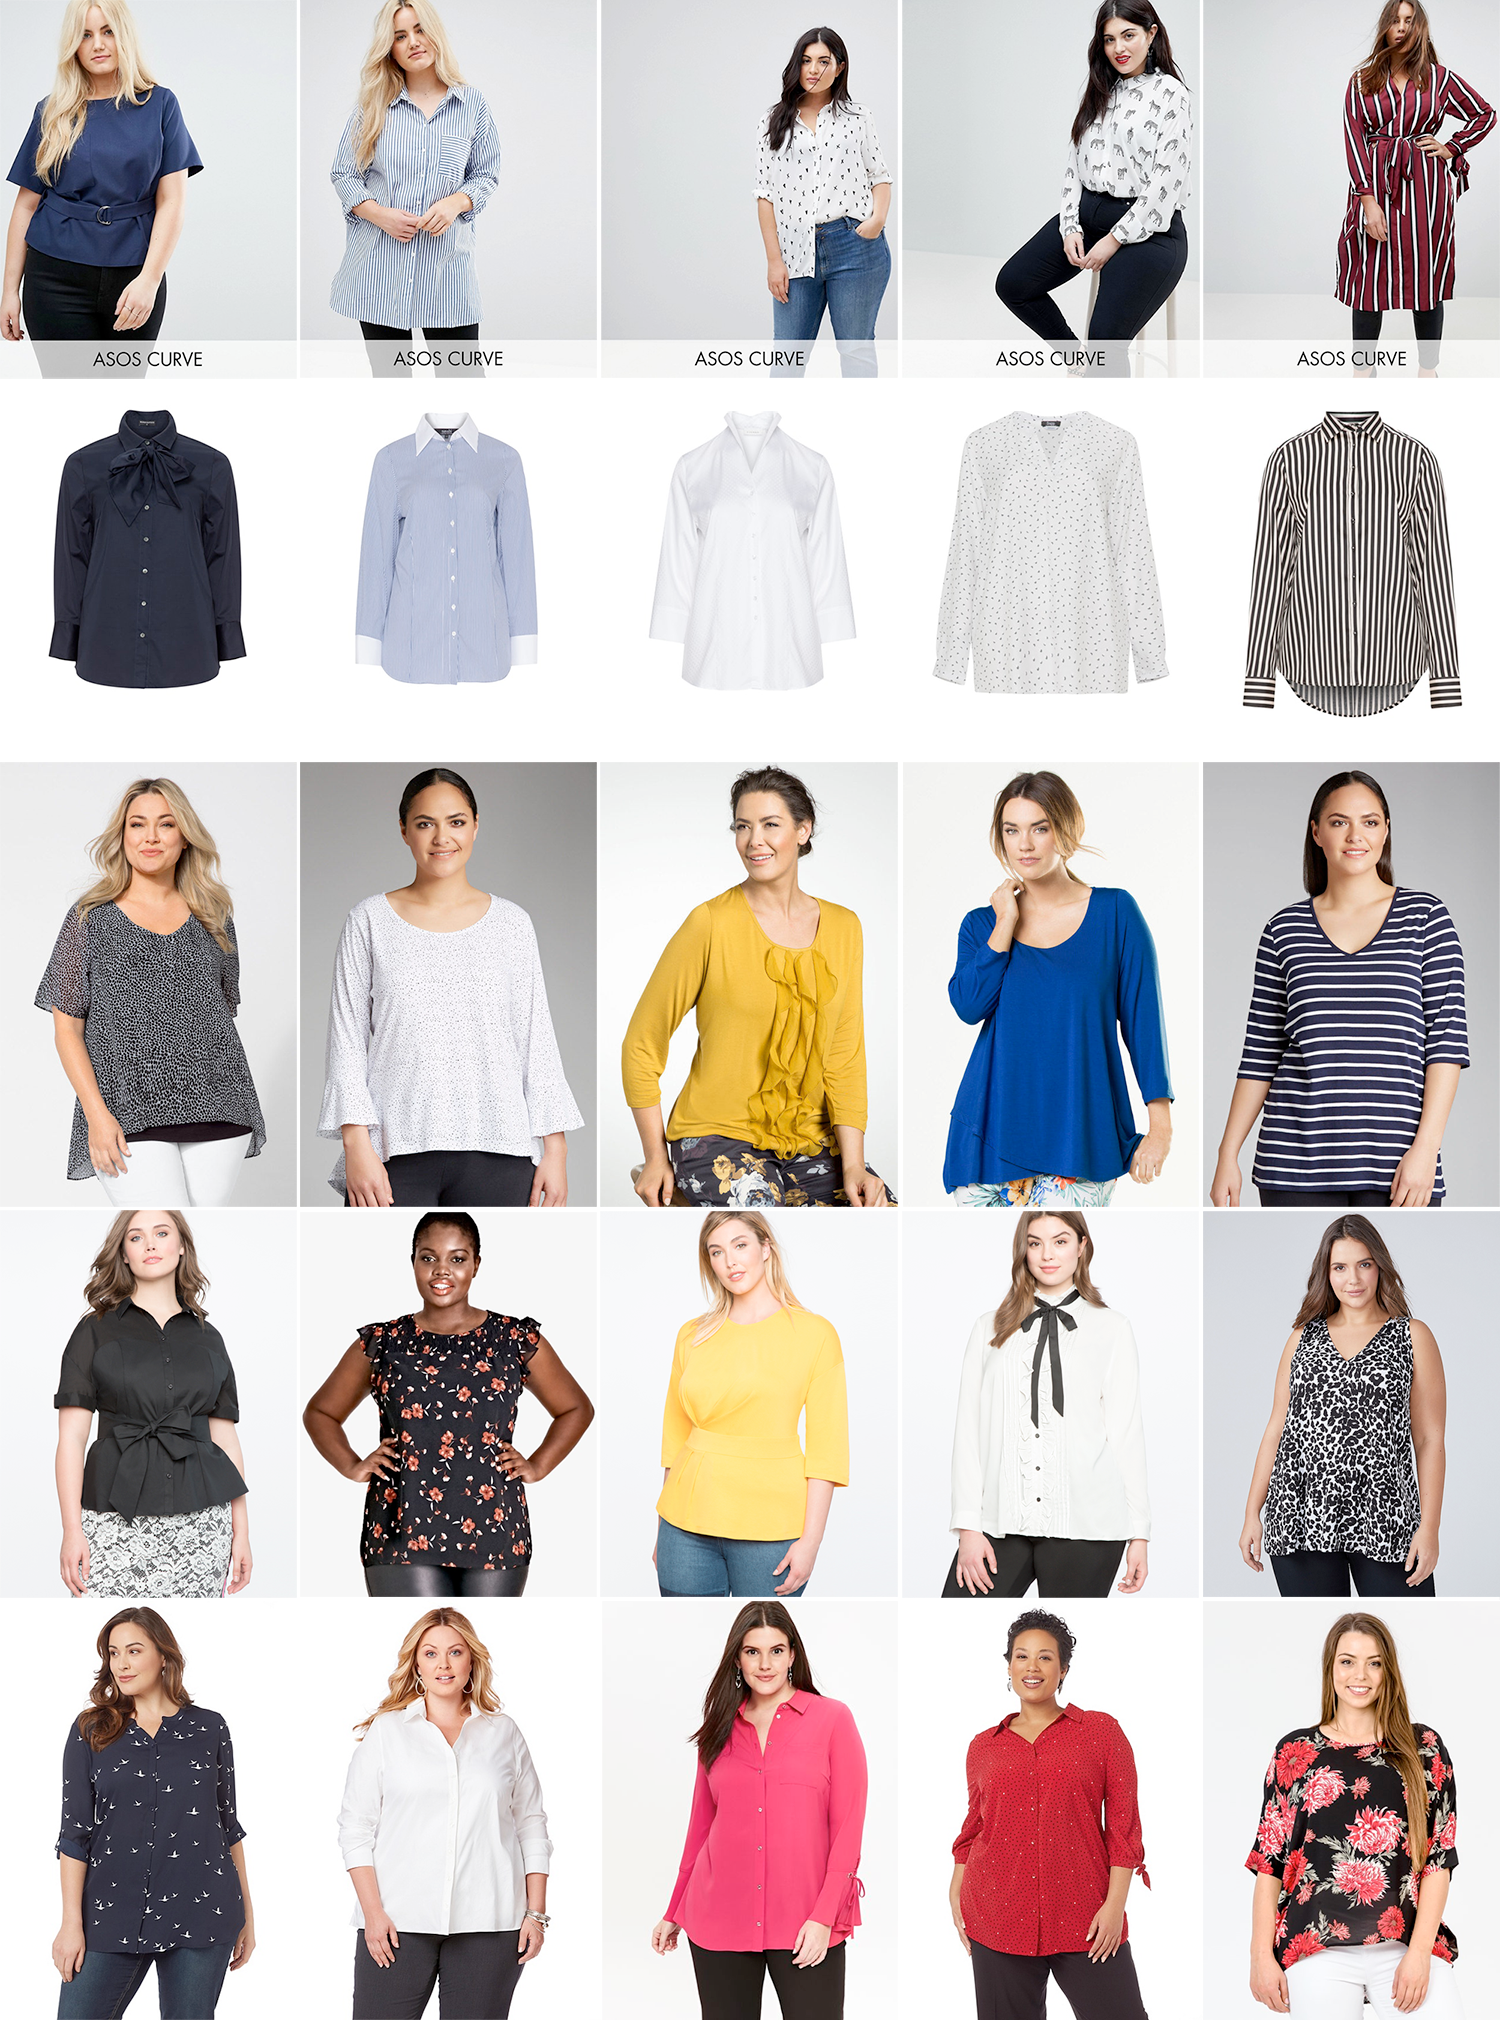 Plus size workwear tops // Row 1 L-R: ASOS CURVE Top with Buckle Detail & Pocket, $65.56 from ASOS; ASOS CURVE Oversized Smart Cotton Shirt in Stripe with Curved Hem, $61.19 from ASOS; ASOS CURVE Blouse in Mono Heart Print, $69.93 from ASOS; ASOS CURVE Shirt in Zebra Print, $54.63 from ASOS; ASOS CURVE Longline Shirt in Stripe with Eyelet Detail, $78.67 from ASOS. Row 2 L-R: Manon Baptiste Pussy Bow Blouse, AUD $162.99 from navabi; navabi Striped Shirt, AUD $258.99 from navabi; Eterna Spot Blouse, AUD $143.99 from navabi; Frapp Printed Blouse, AUD $74.99 from navabi; Eterna Stripe Print Shirt, AUD $112.99 from navabi. Row 3 L-R: Sara Printed Layer Tunic, $79.99 from EziBuy; Sara Bell Sleeve Top, $25.00 from EziBuy; Sara Ruffle Knit Top, $35.00 from EziBuy; Sara Crossover Top, $59.99 from EziBuy; Sara V Neck Tee, $39.99 from EziBuy. Row 4 L-R: Tie Waist Button Up with Bustier, USD $62.90 from Eloquii; Fall in Love Top, $79.99 from City Chic; Asymmetrical Pleated Top, USD $49.90 from Eloquii; Ruffle Front Button Down Blouse, USD $64.90 from Eloquii; V-Neck Swing Tank, USD $34.95 from Lane Bryant. Row 5 L-R: Fly Away Shirt, $94.50 from Catherines; No-Iron Shirt, $133.10 from Catherines; Pink Eyelet Flute Sleeve Shirt, £25.20 from Evans; Hearts Afire Buttonfront, $94.50 from Catherines; Geranium Print Dolman Sleeve Top, $99.90 from K&K